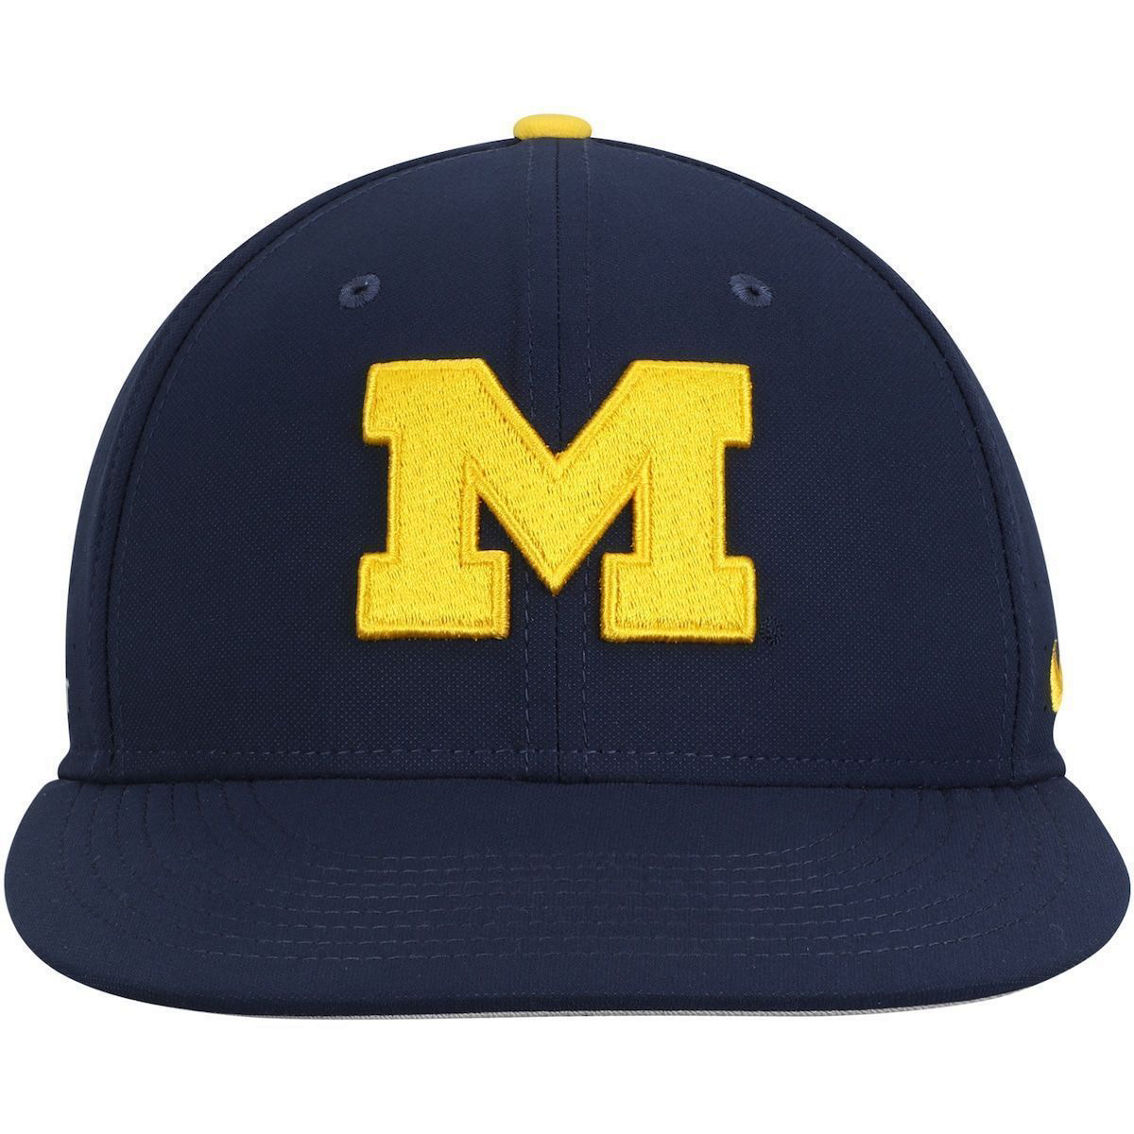 Nike Men's Navy Michigan Wolverines Aerobill Performance True Fitted Hat - Image 4 of 4